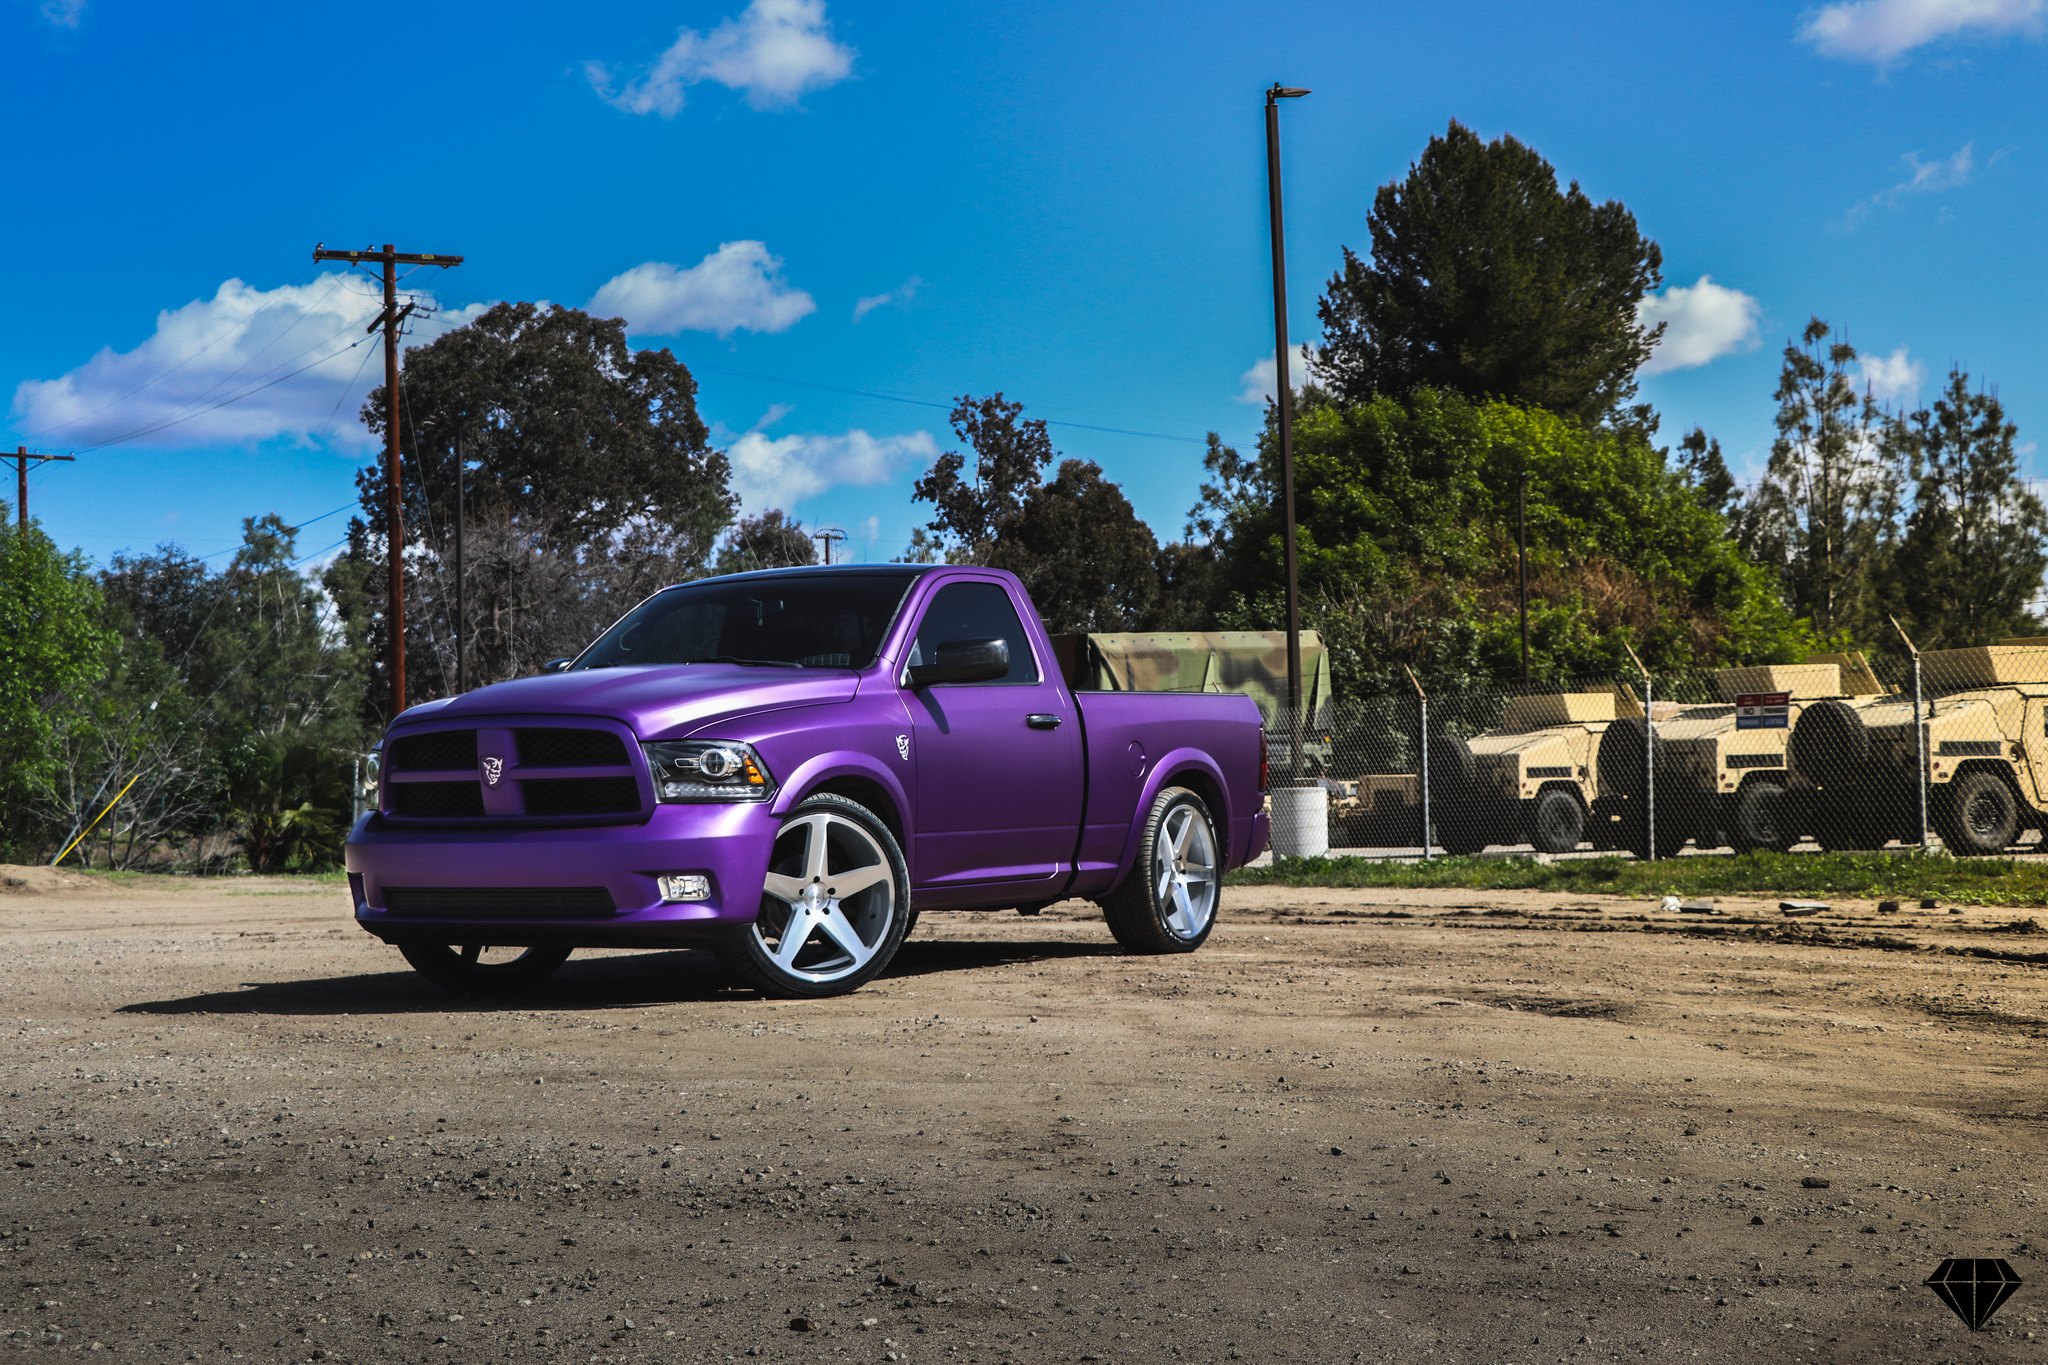 Front Bumper with LED Lights on Matte Purple Dodge Ram - Photo by Blaque Diamond Wheels